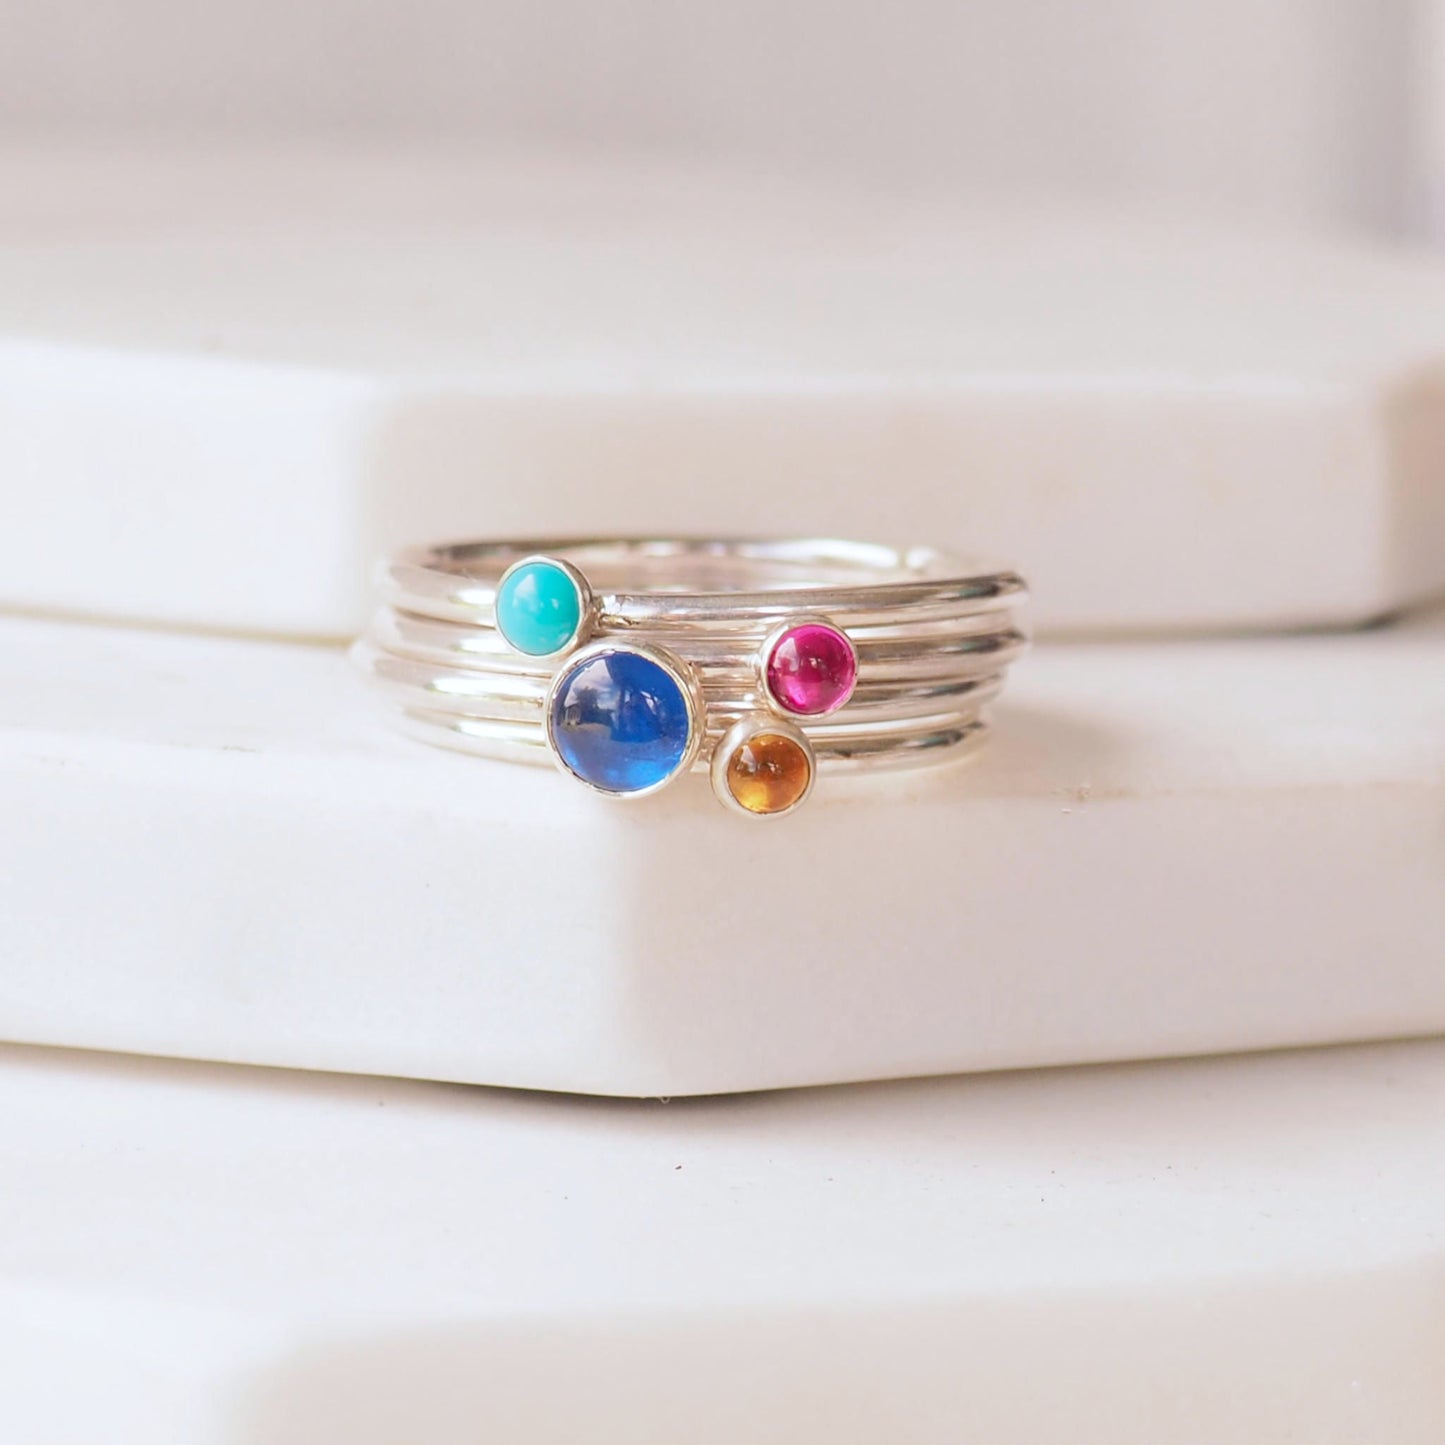 Four ring set with Lab Sapphire, Turquoise, Lab Ruby and Citrine. A colourful birthstone ring set with blue pink and yellow round gemstones. Handmade by maram jewellery in her small studio in Edinburgh UK